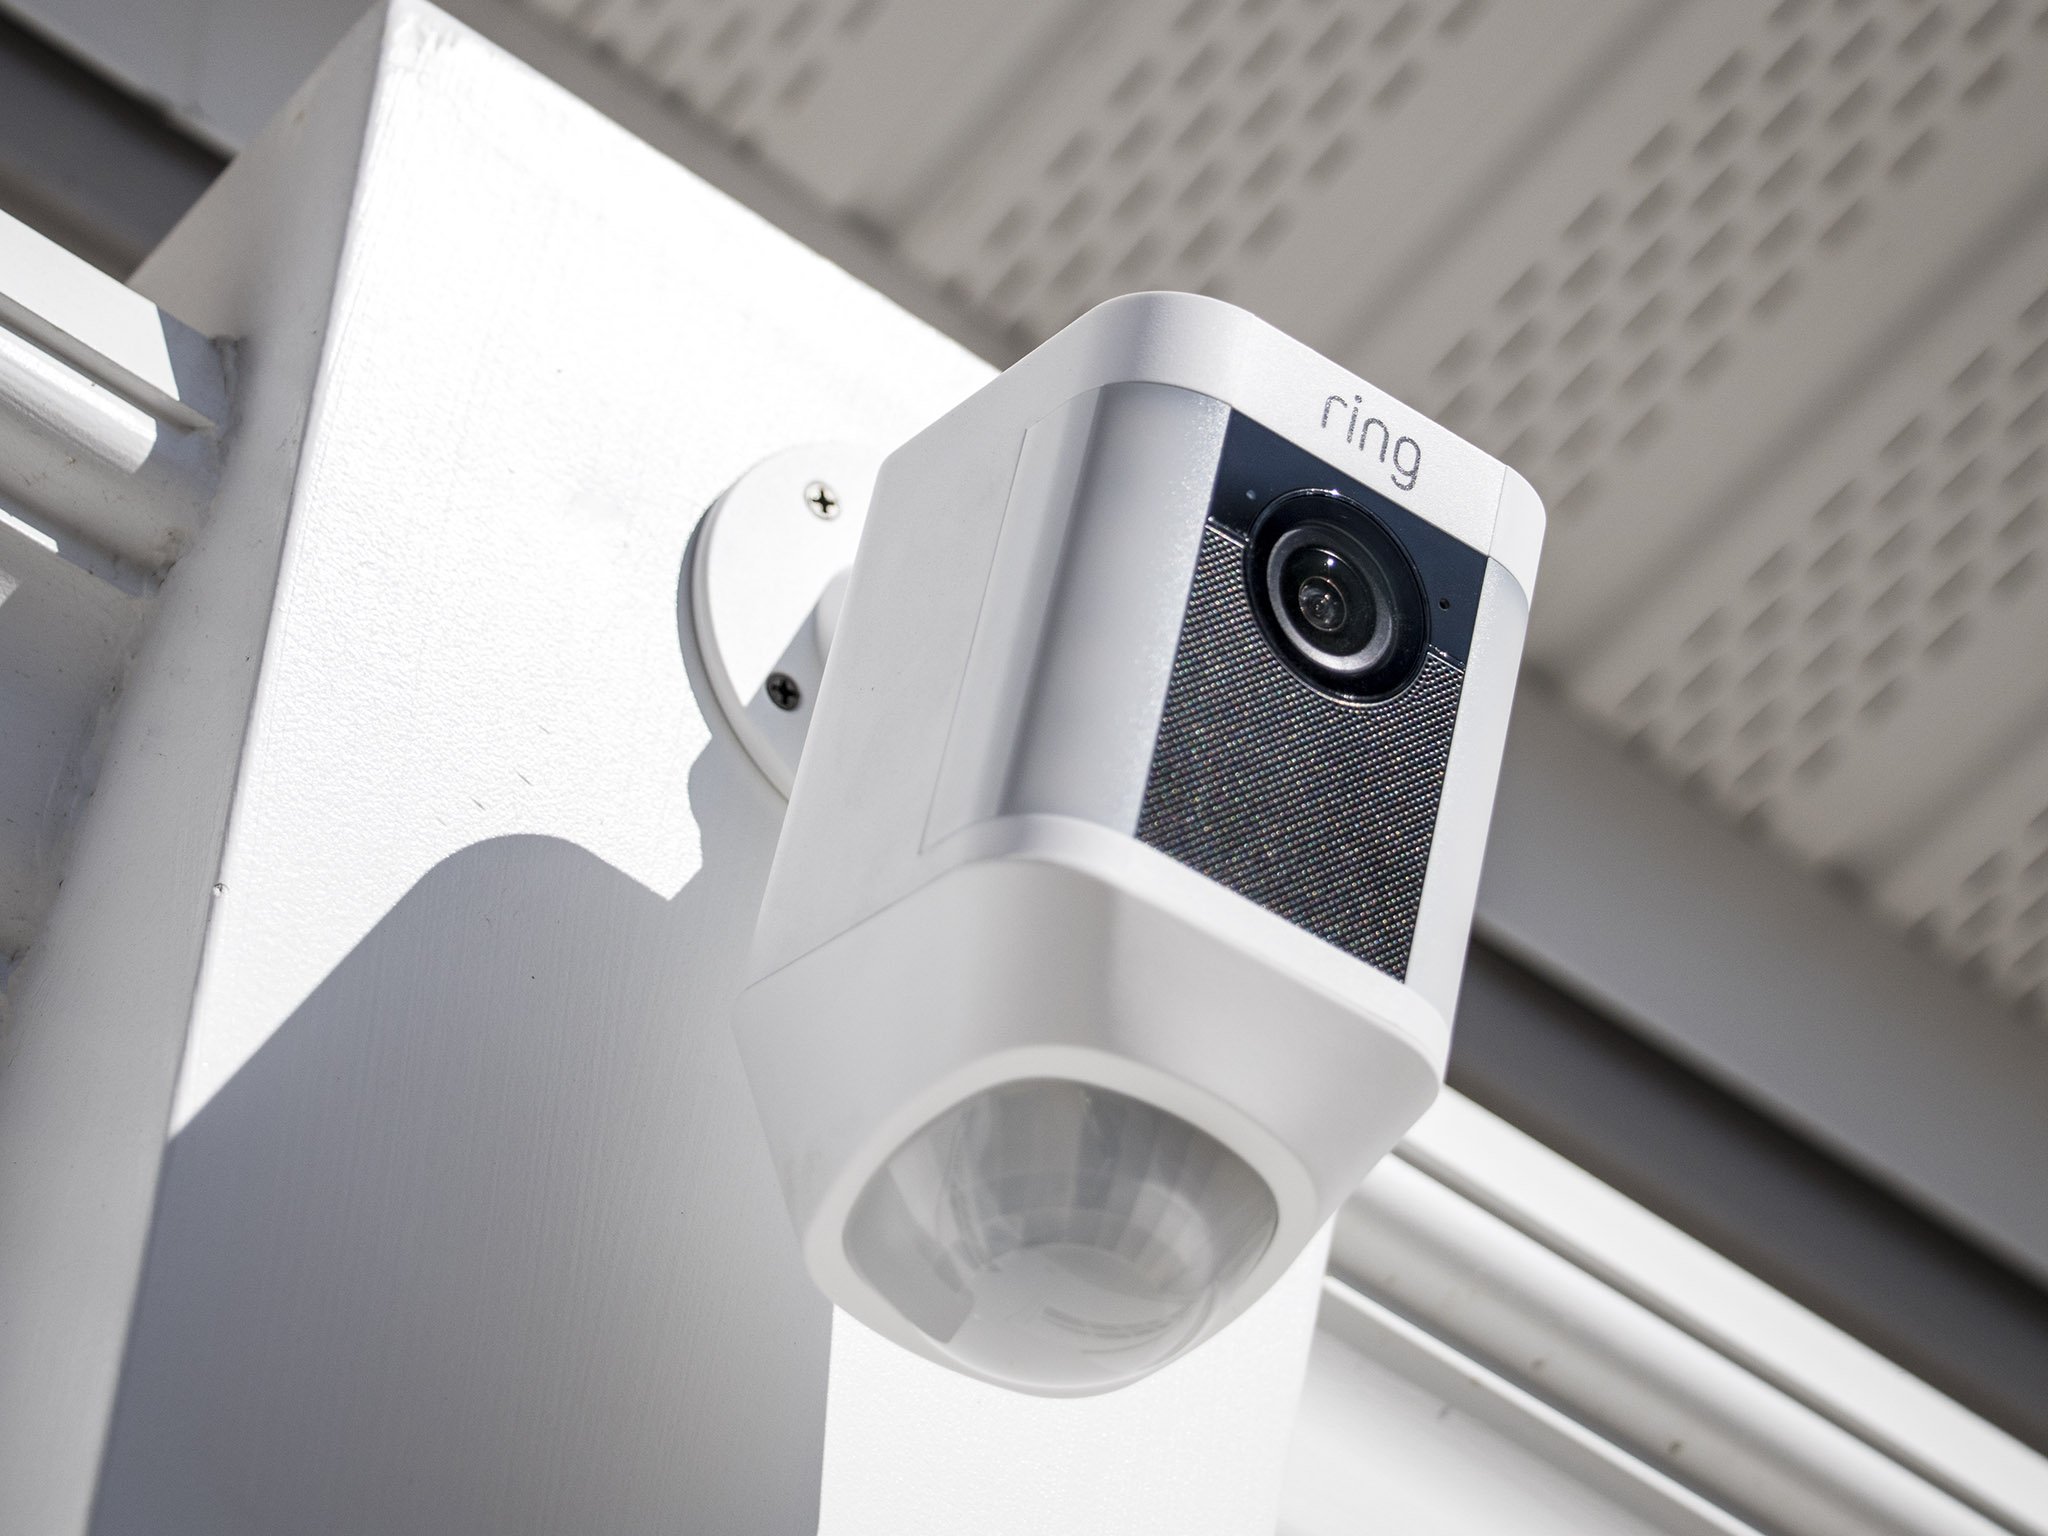 security camera ring review